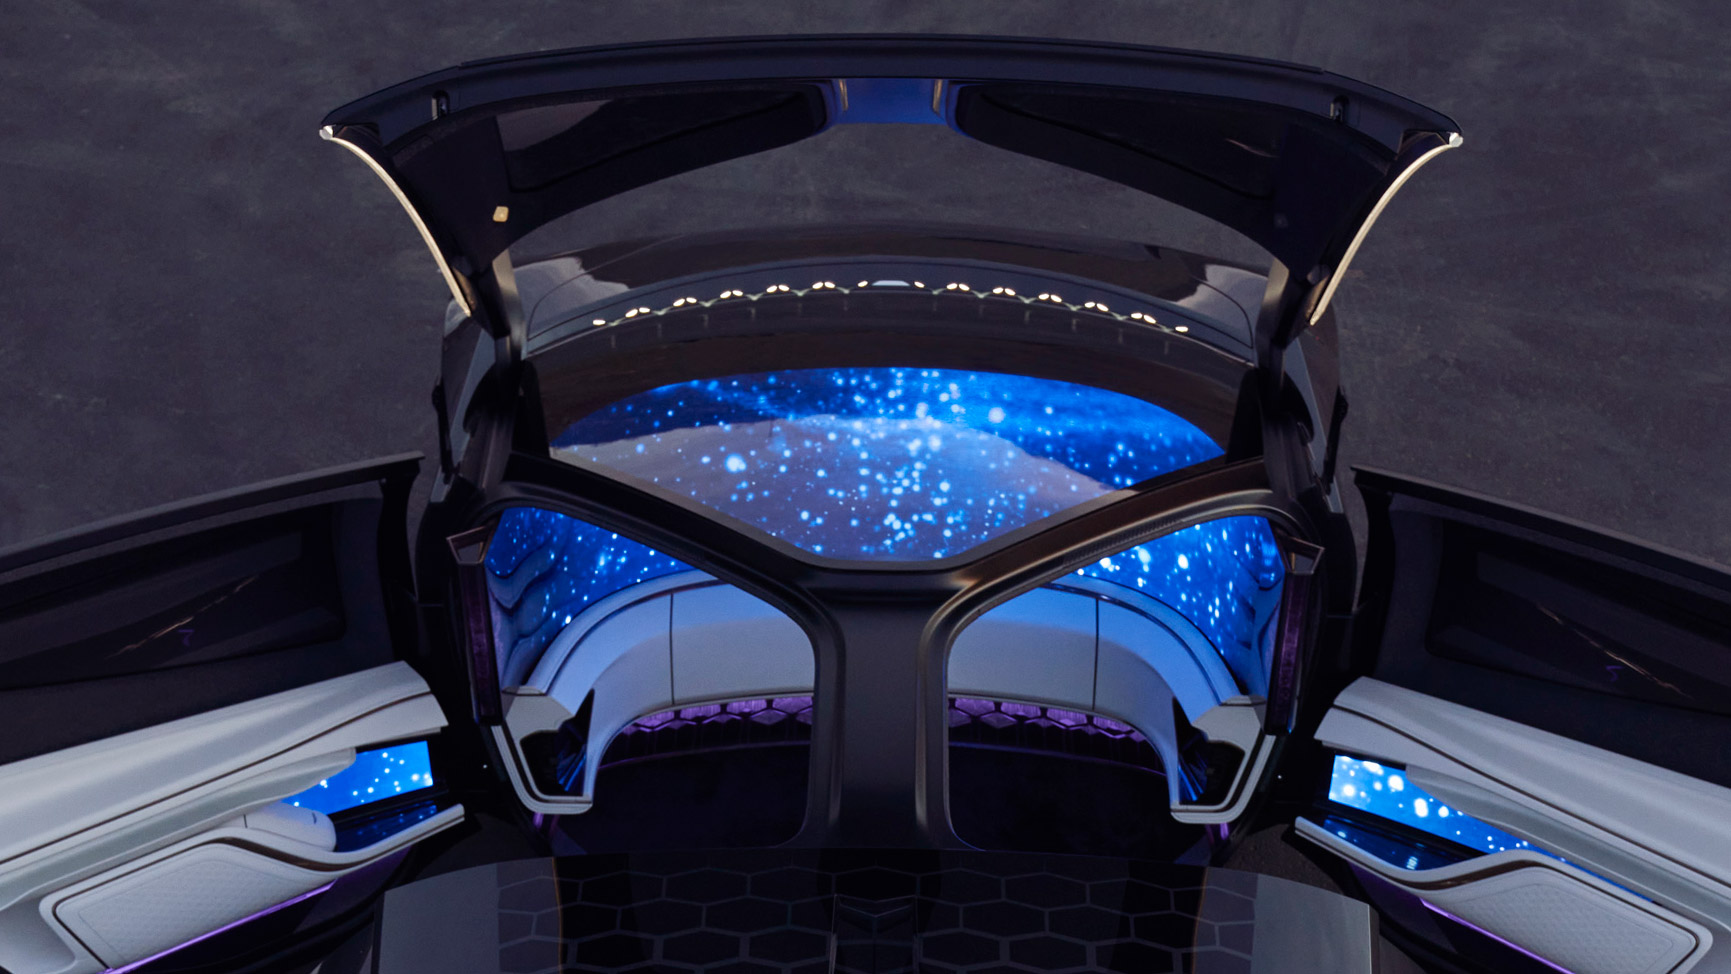 Curved display in the Cadillac InnerSpace concept